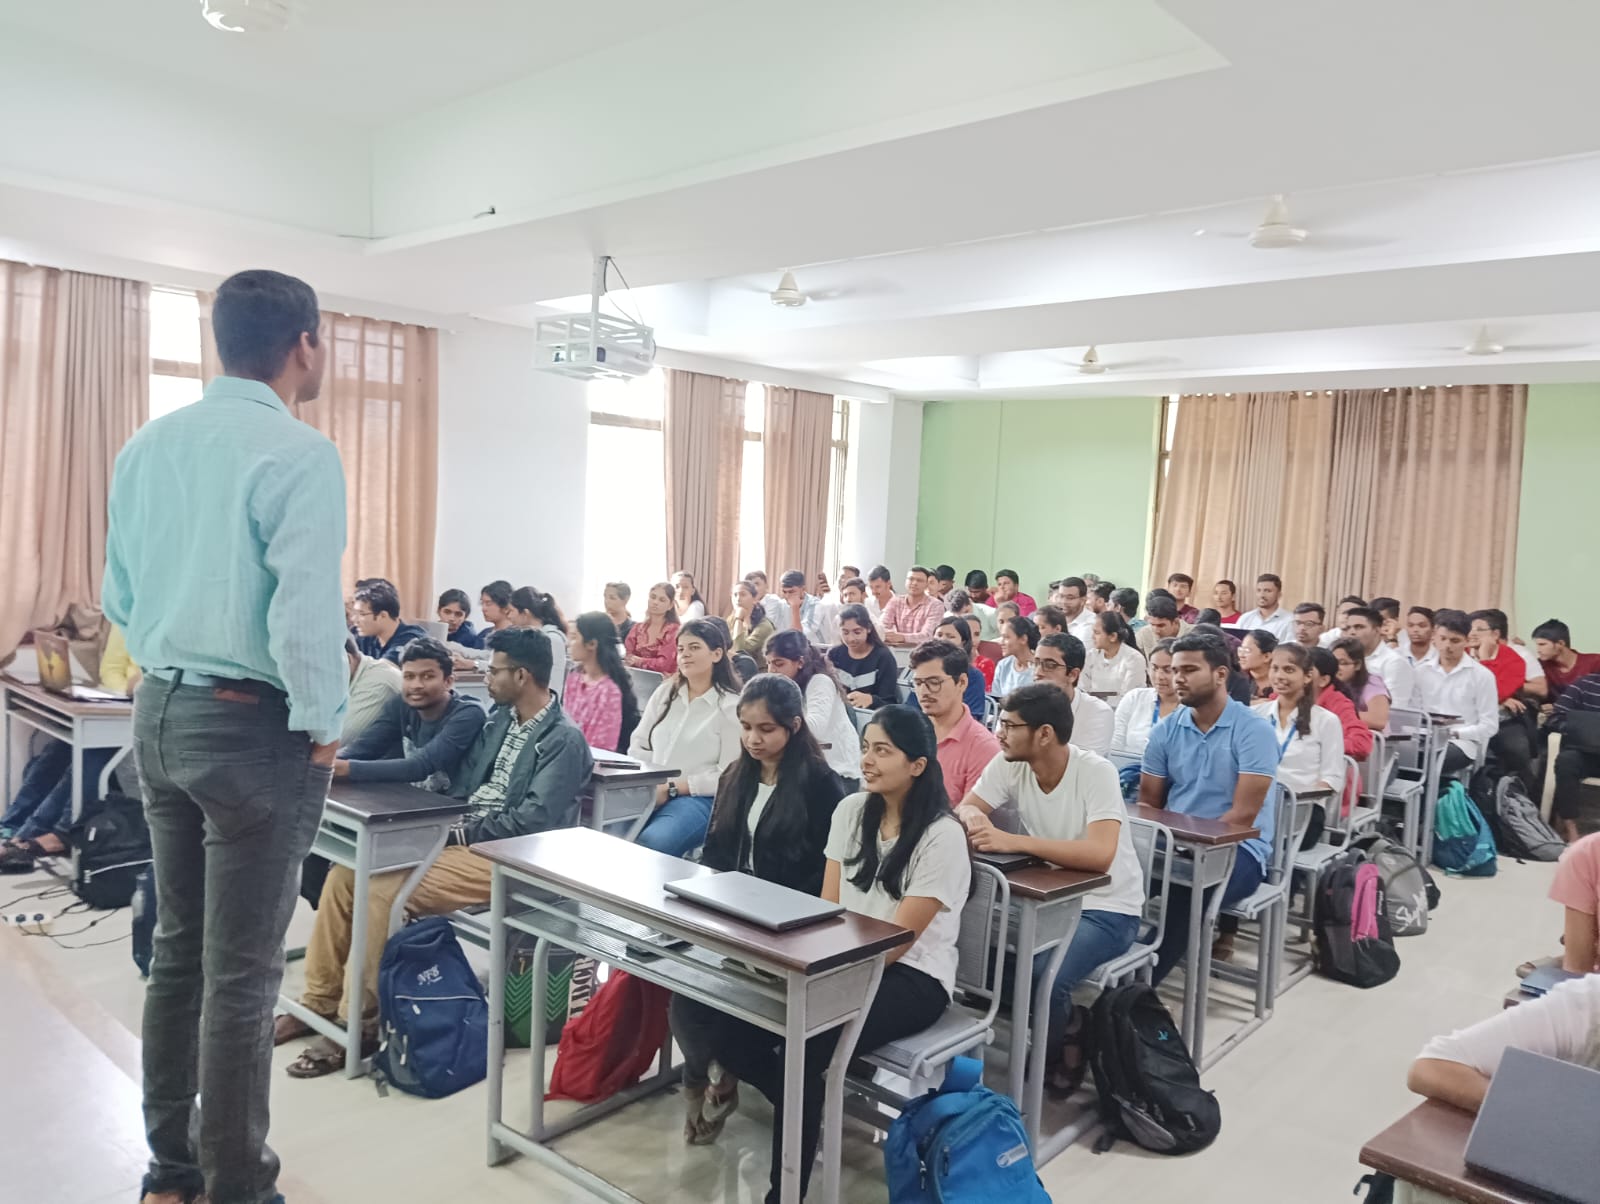 DYPatil in Engineering Two day workshop concluded